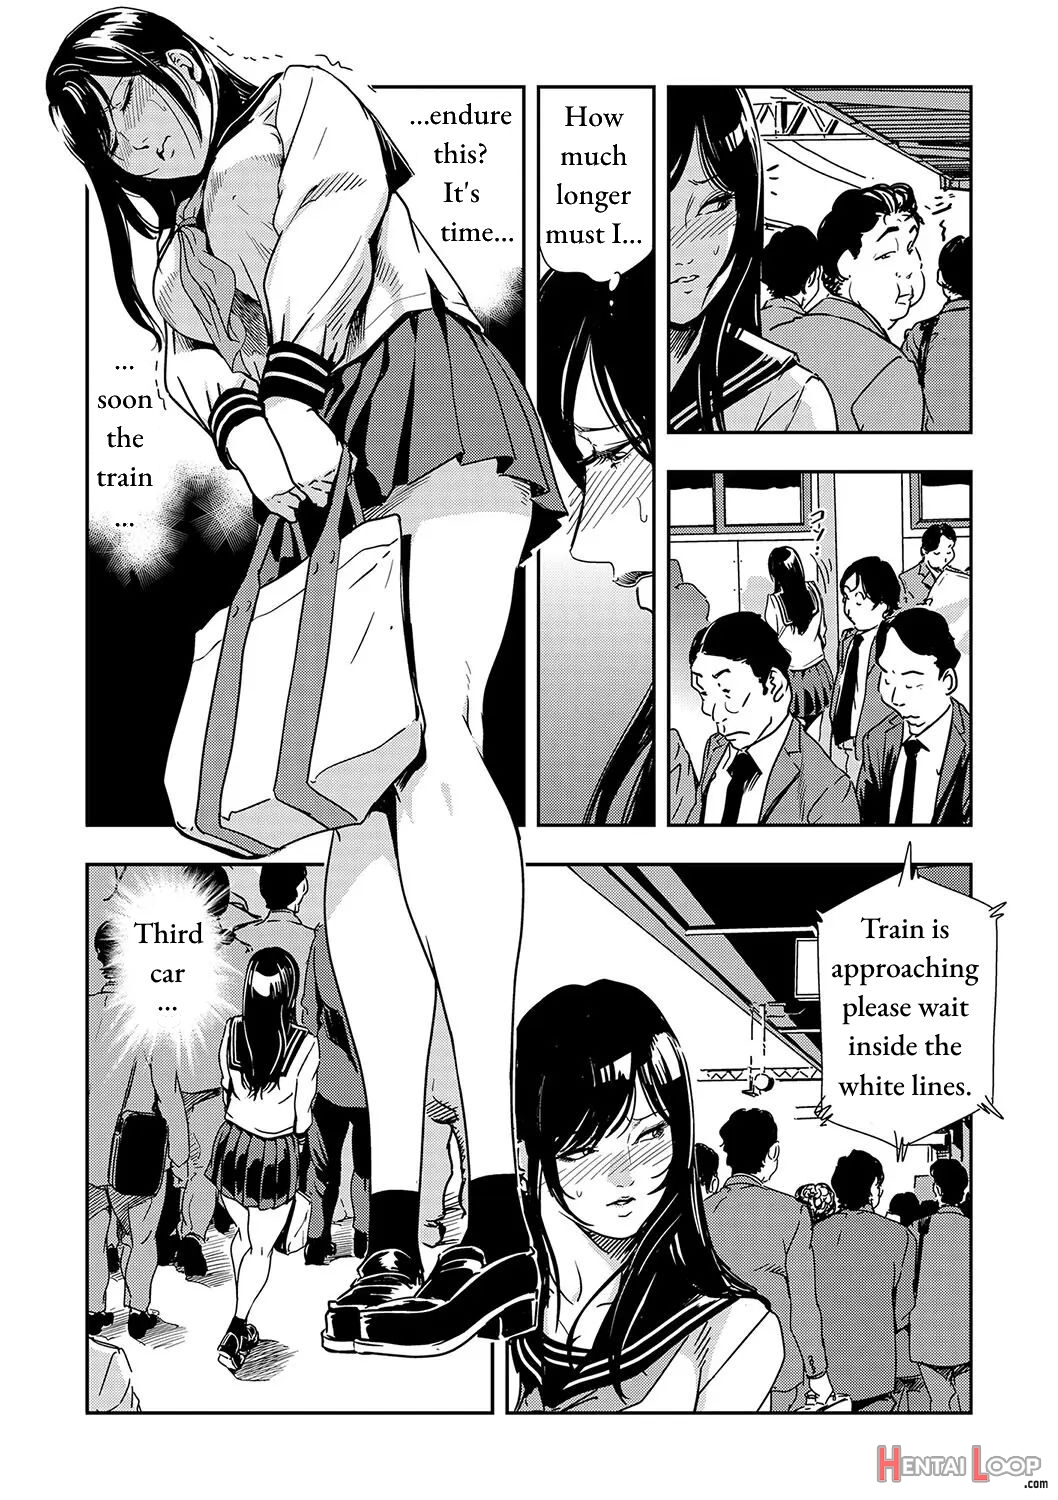 Chikan Express Ch. 03 page 4